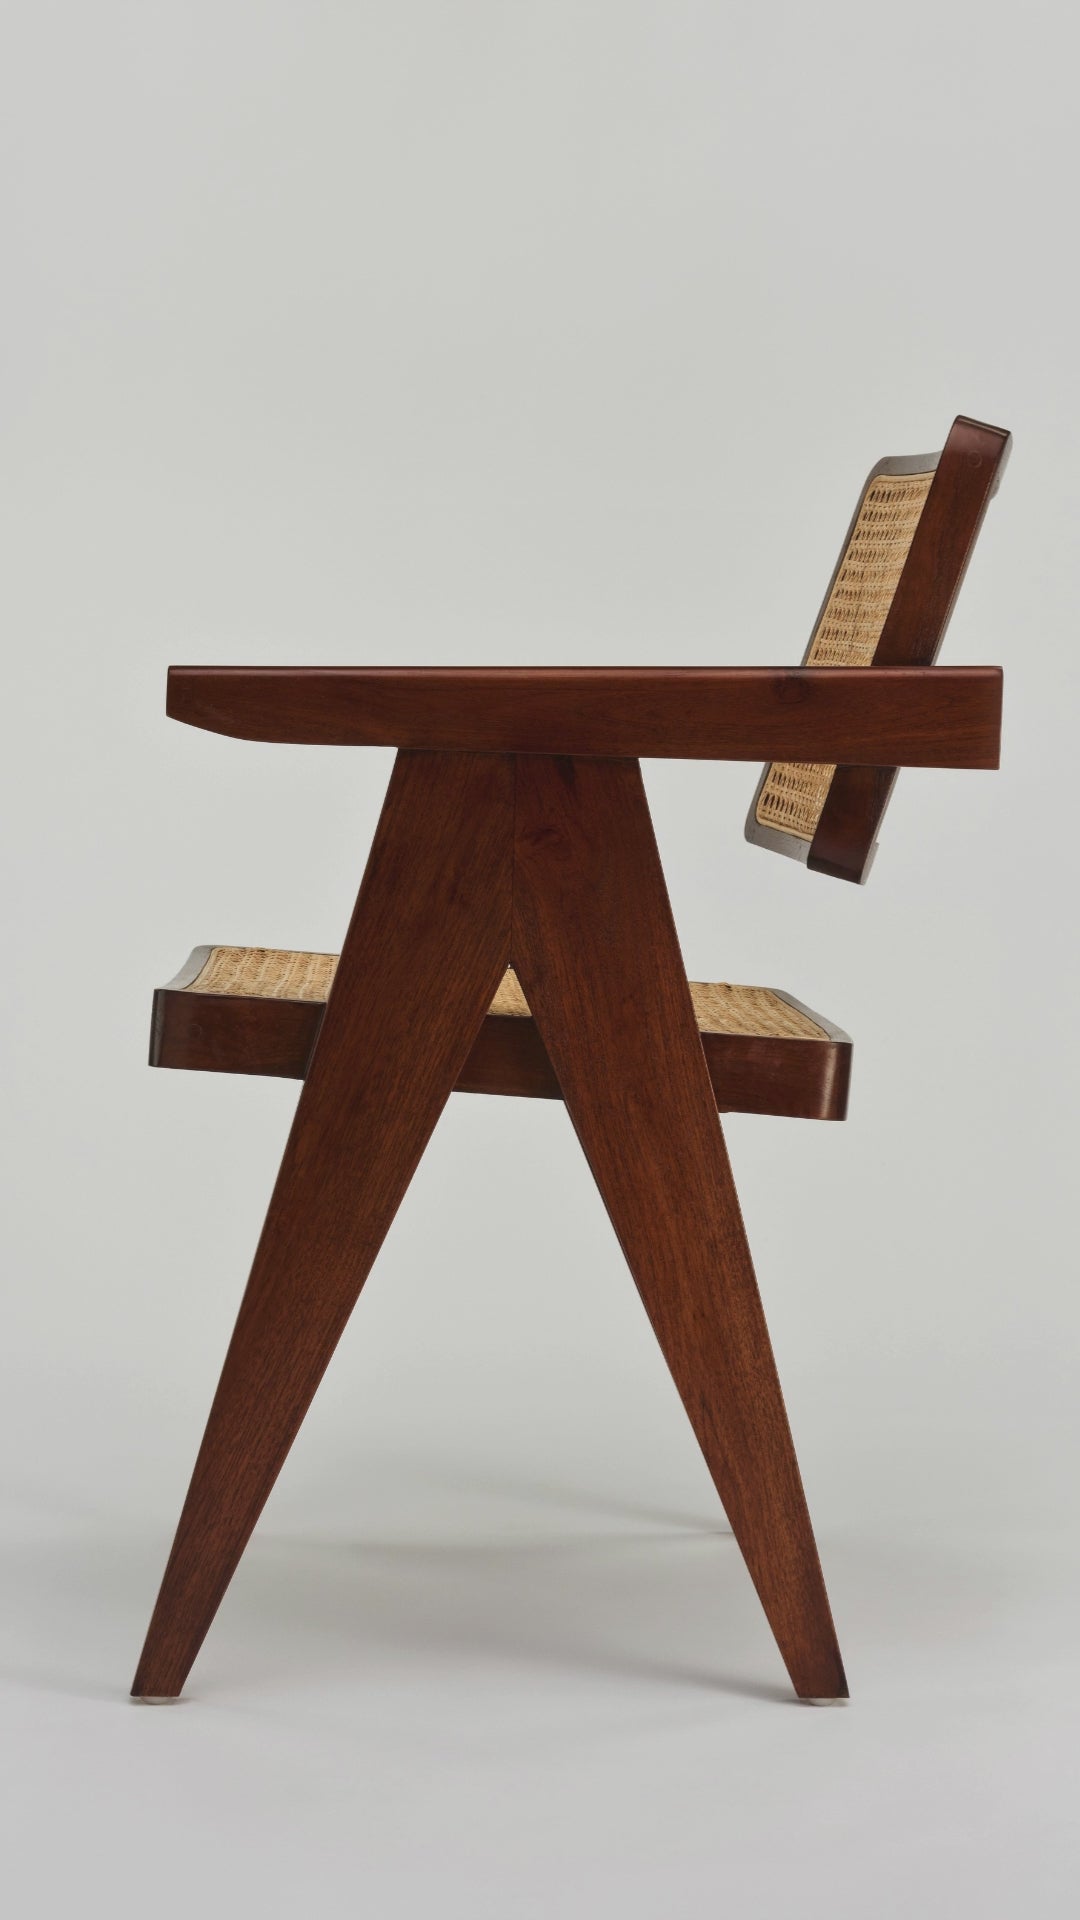 Video of The Pierre Chair